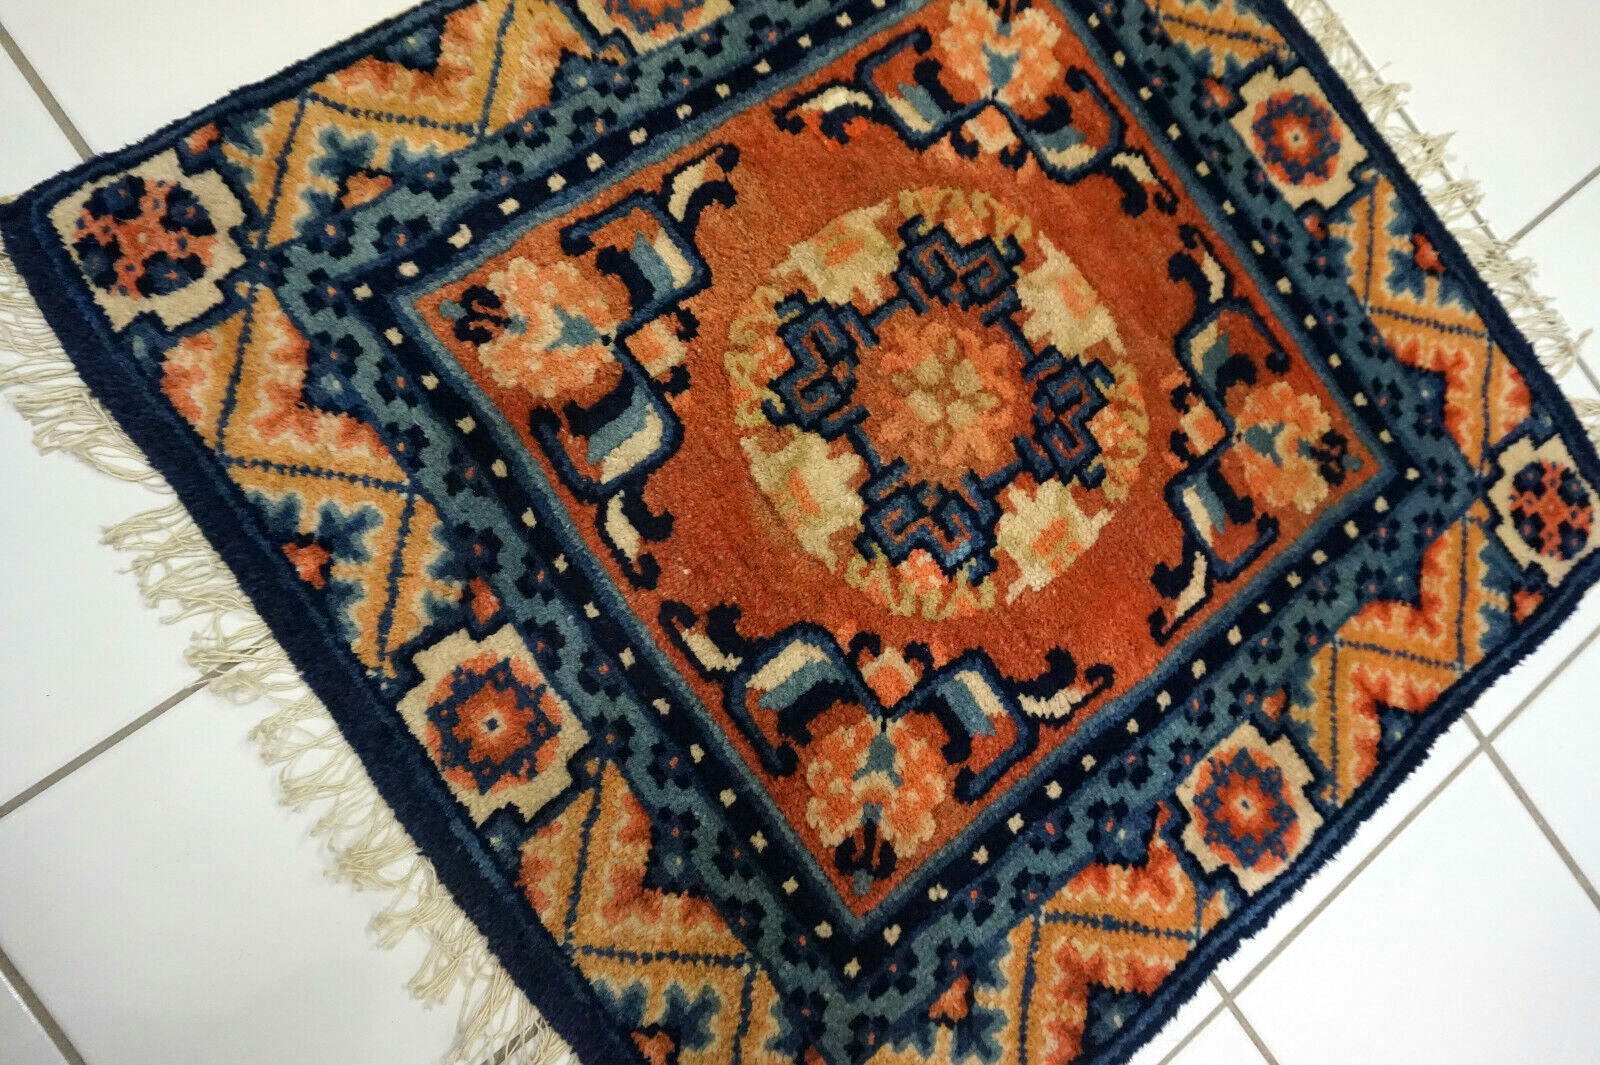 Detailed View of Ningsha Rug's Beige, Red, and Blue Hues, showcasing Traditional Floral Medallion Design and Fine Wool Material